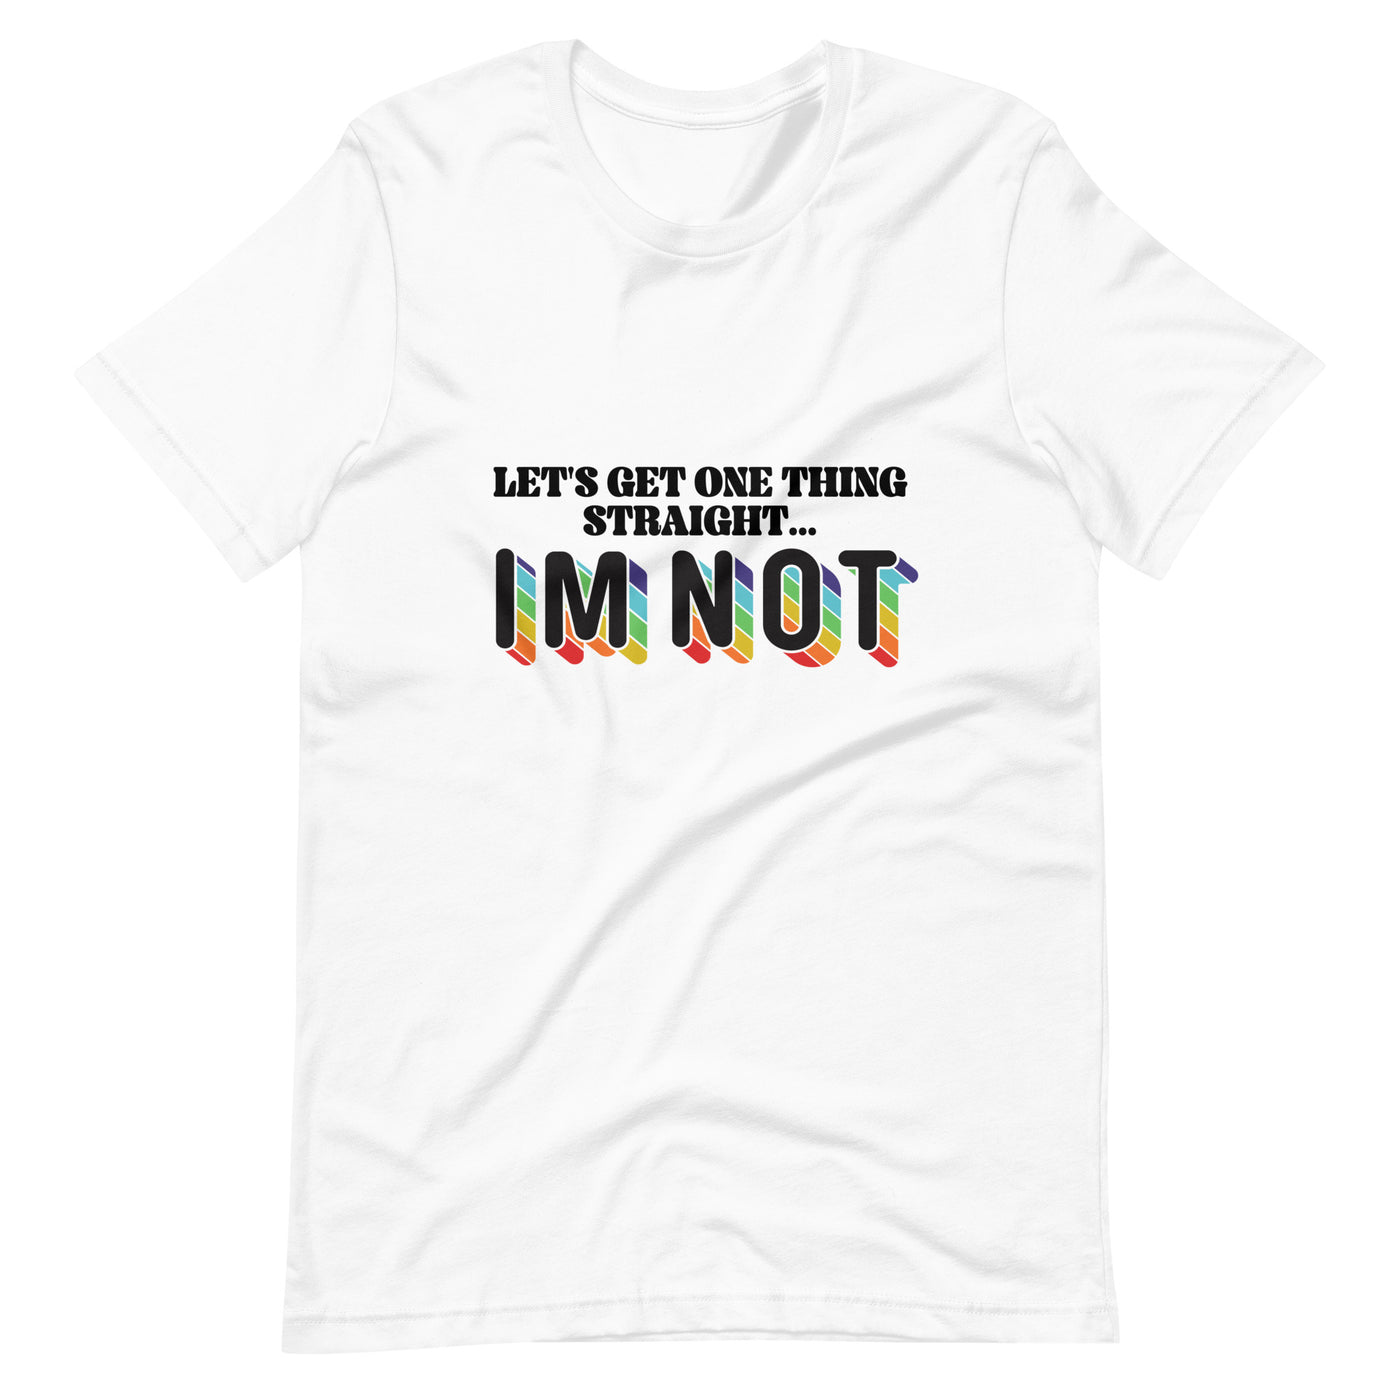 Pride Clothes - Be Clear Let’s Get One Thing Straight … I’m Not T-Shirt - White